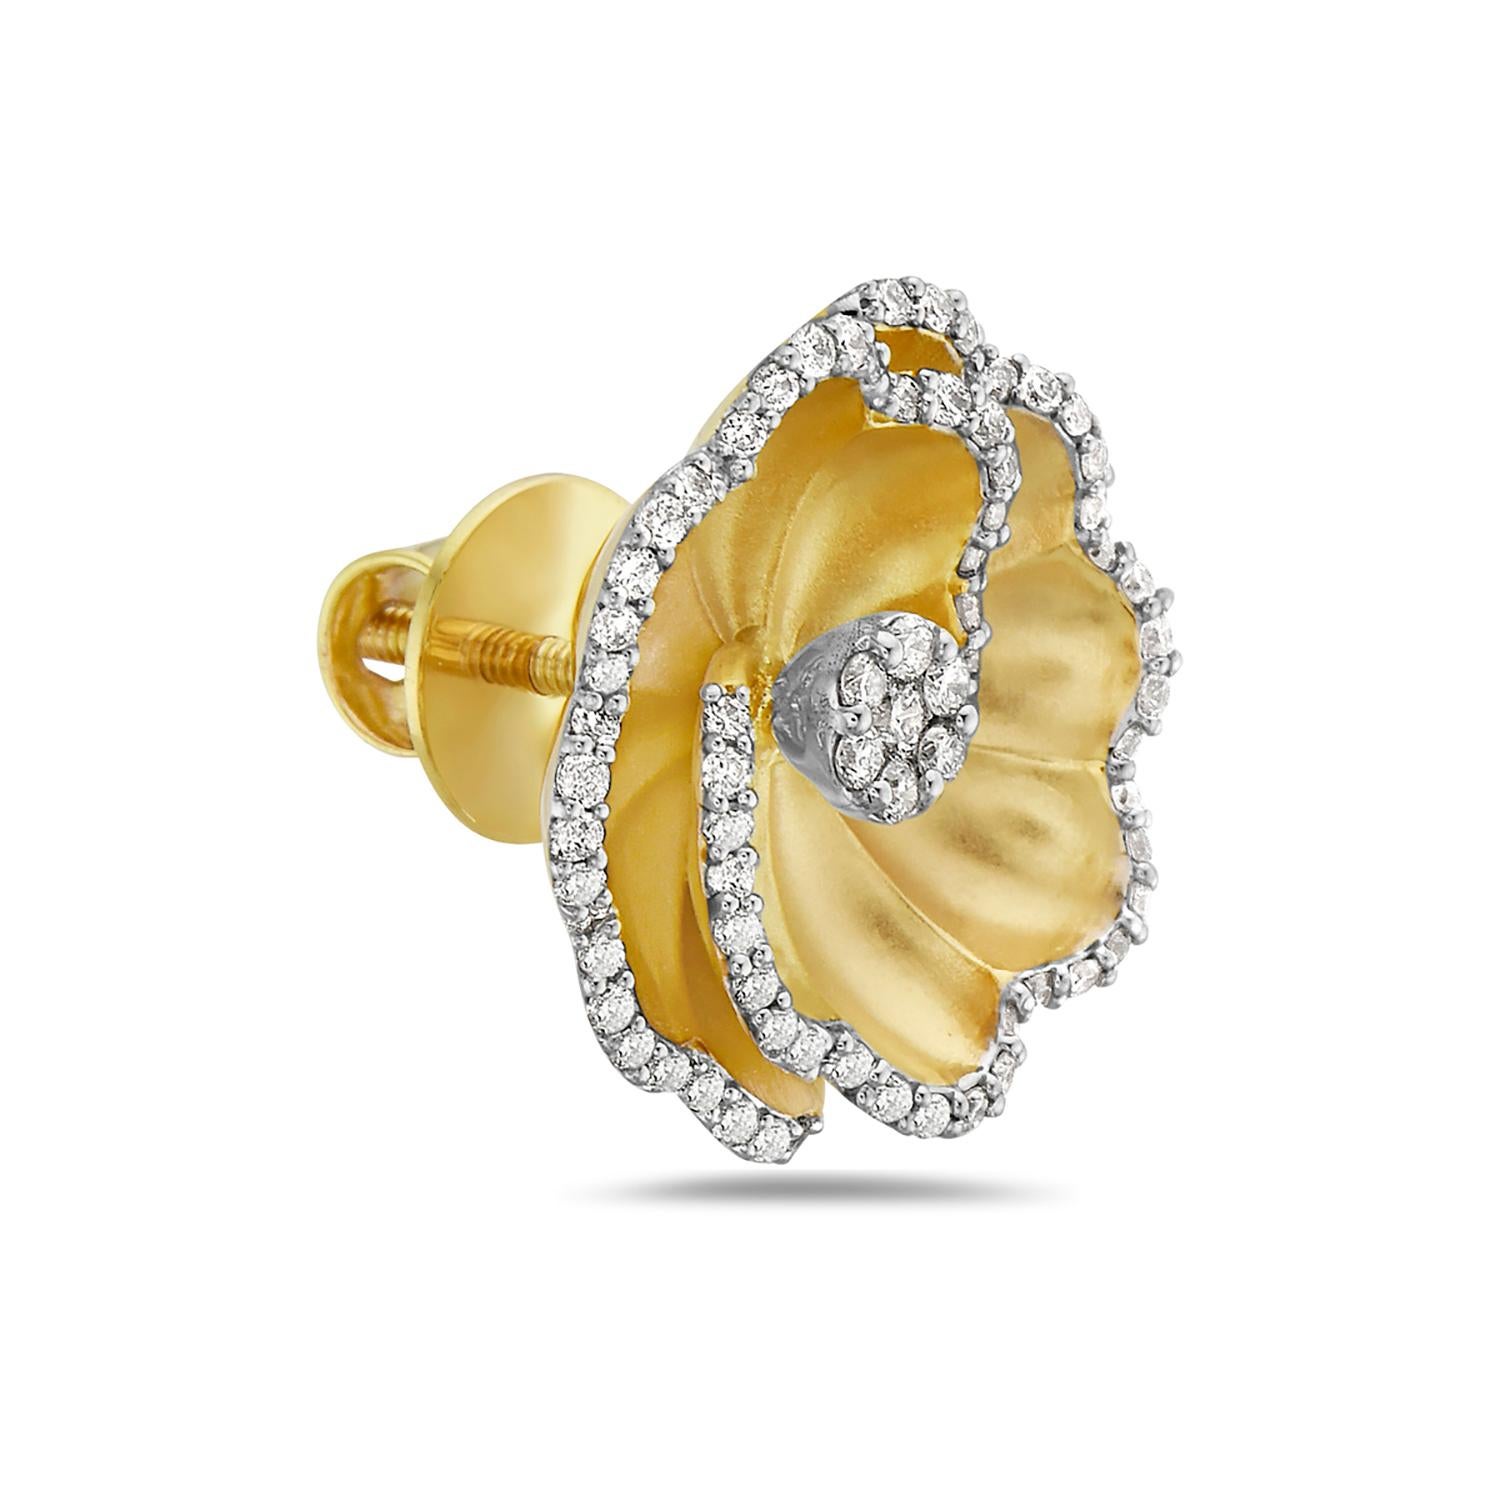 Contemporary Carved Flower Shaped Earrings Accented with Diamonds Made in 14k Yellow Gold For Sale